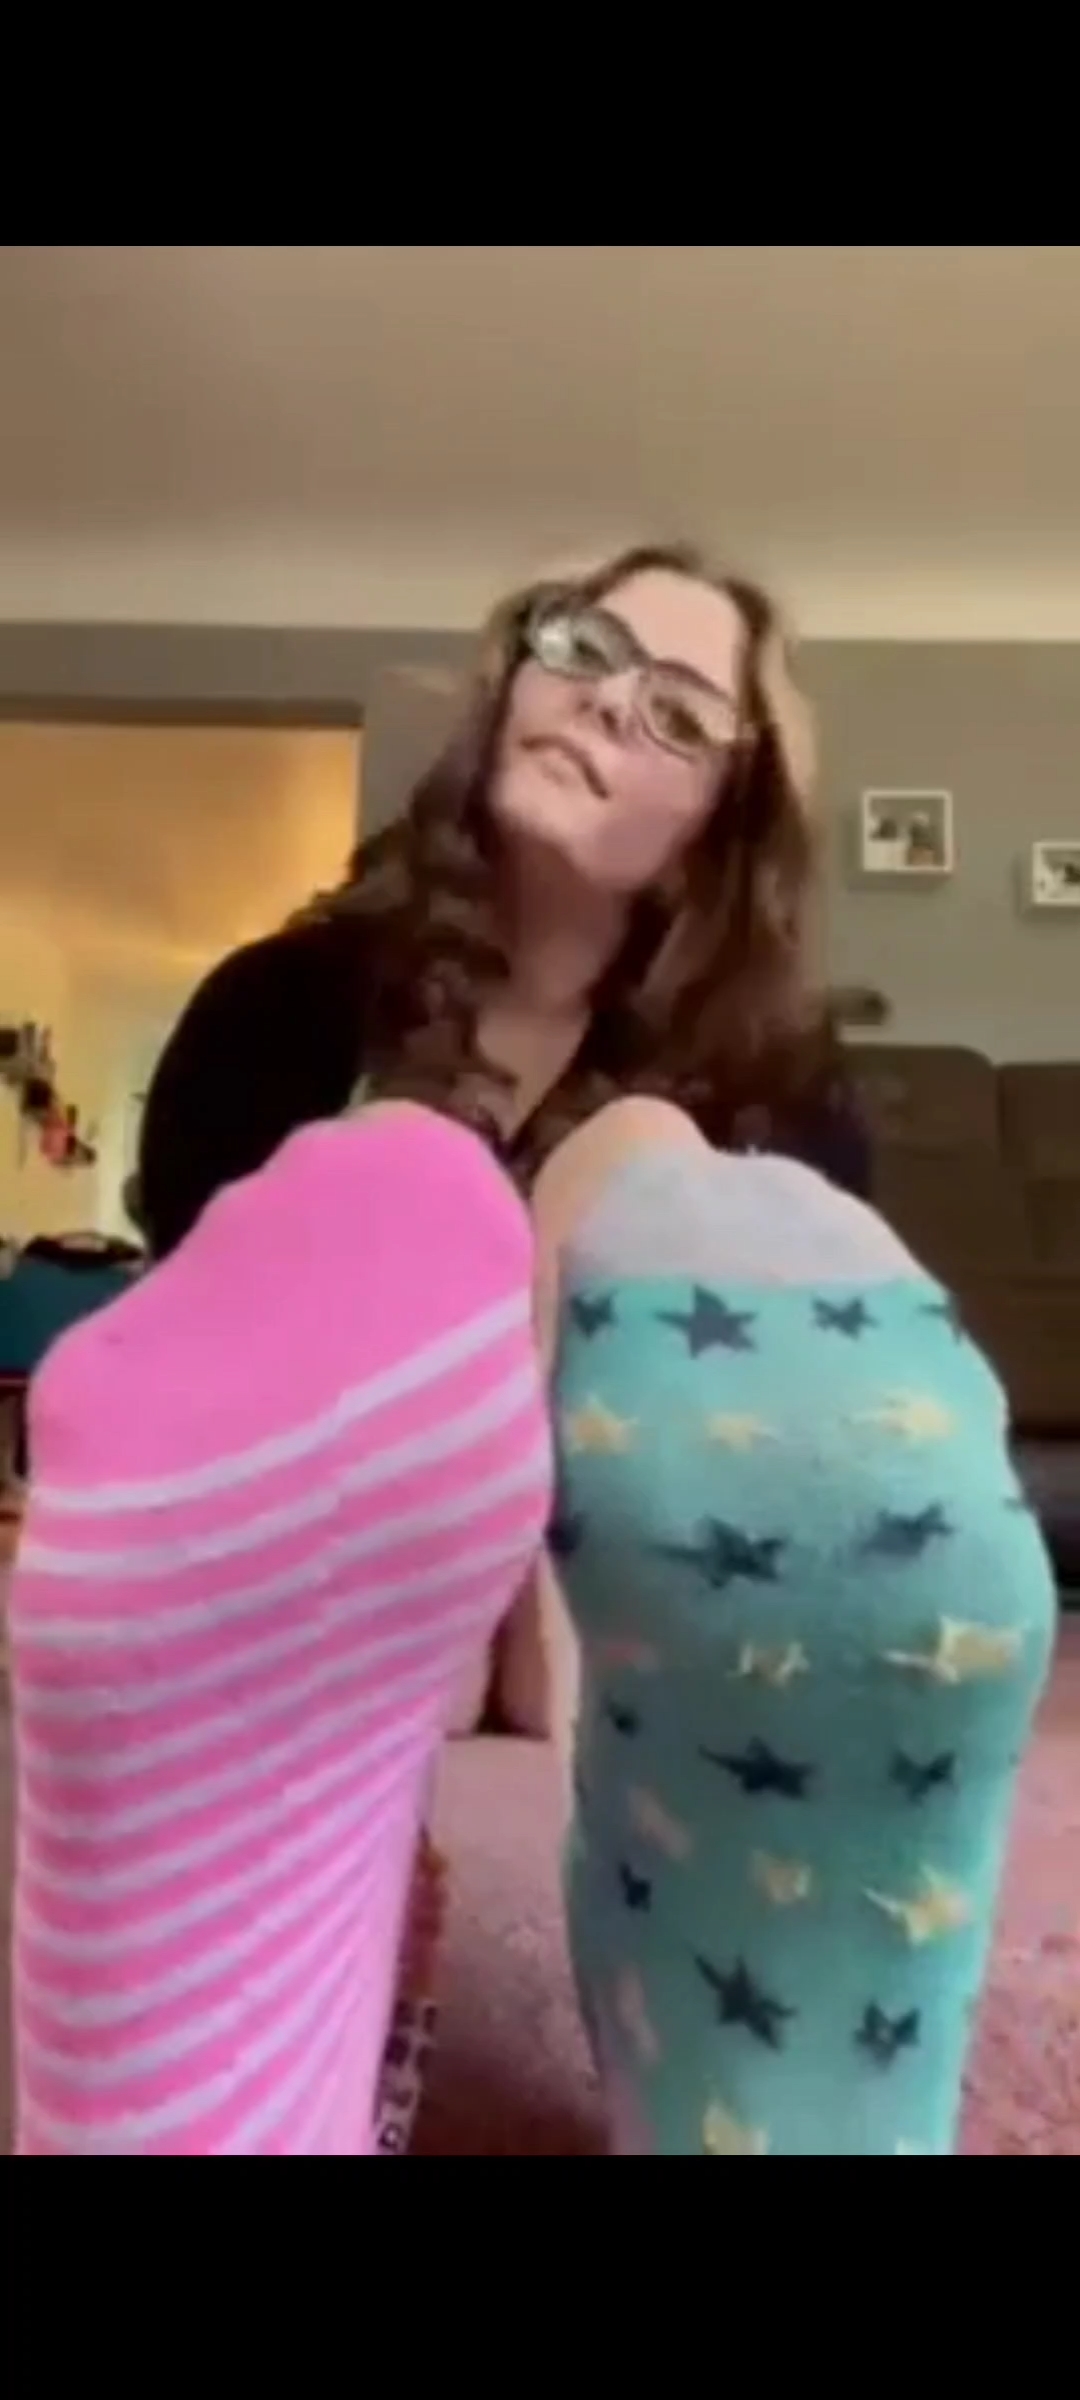 Girl shows off her colorful socks for your pleasure.